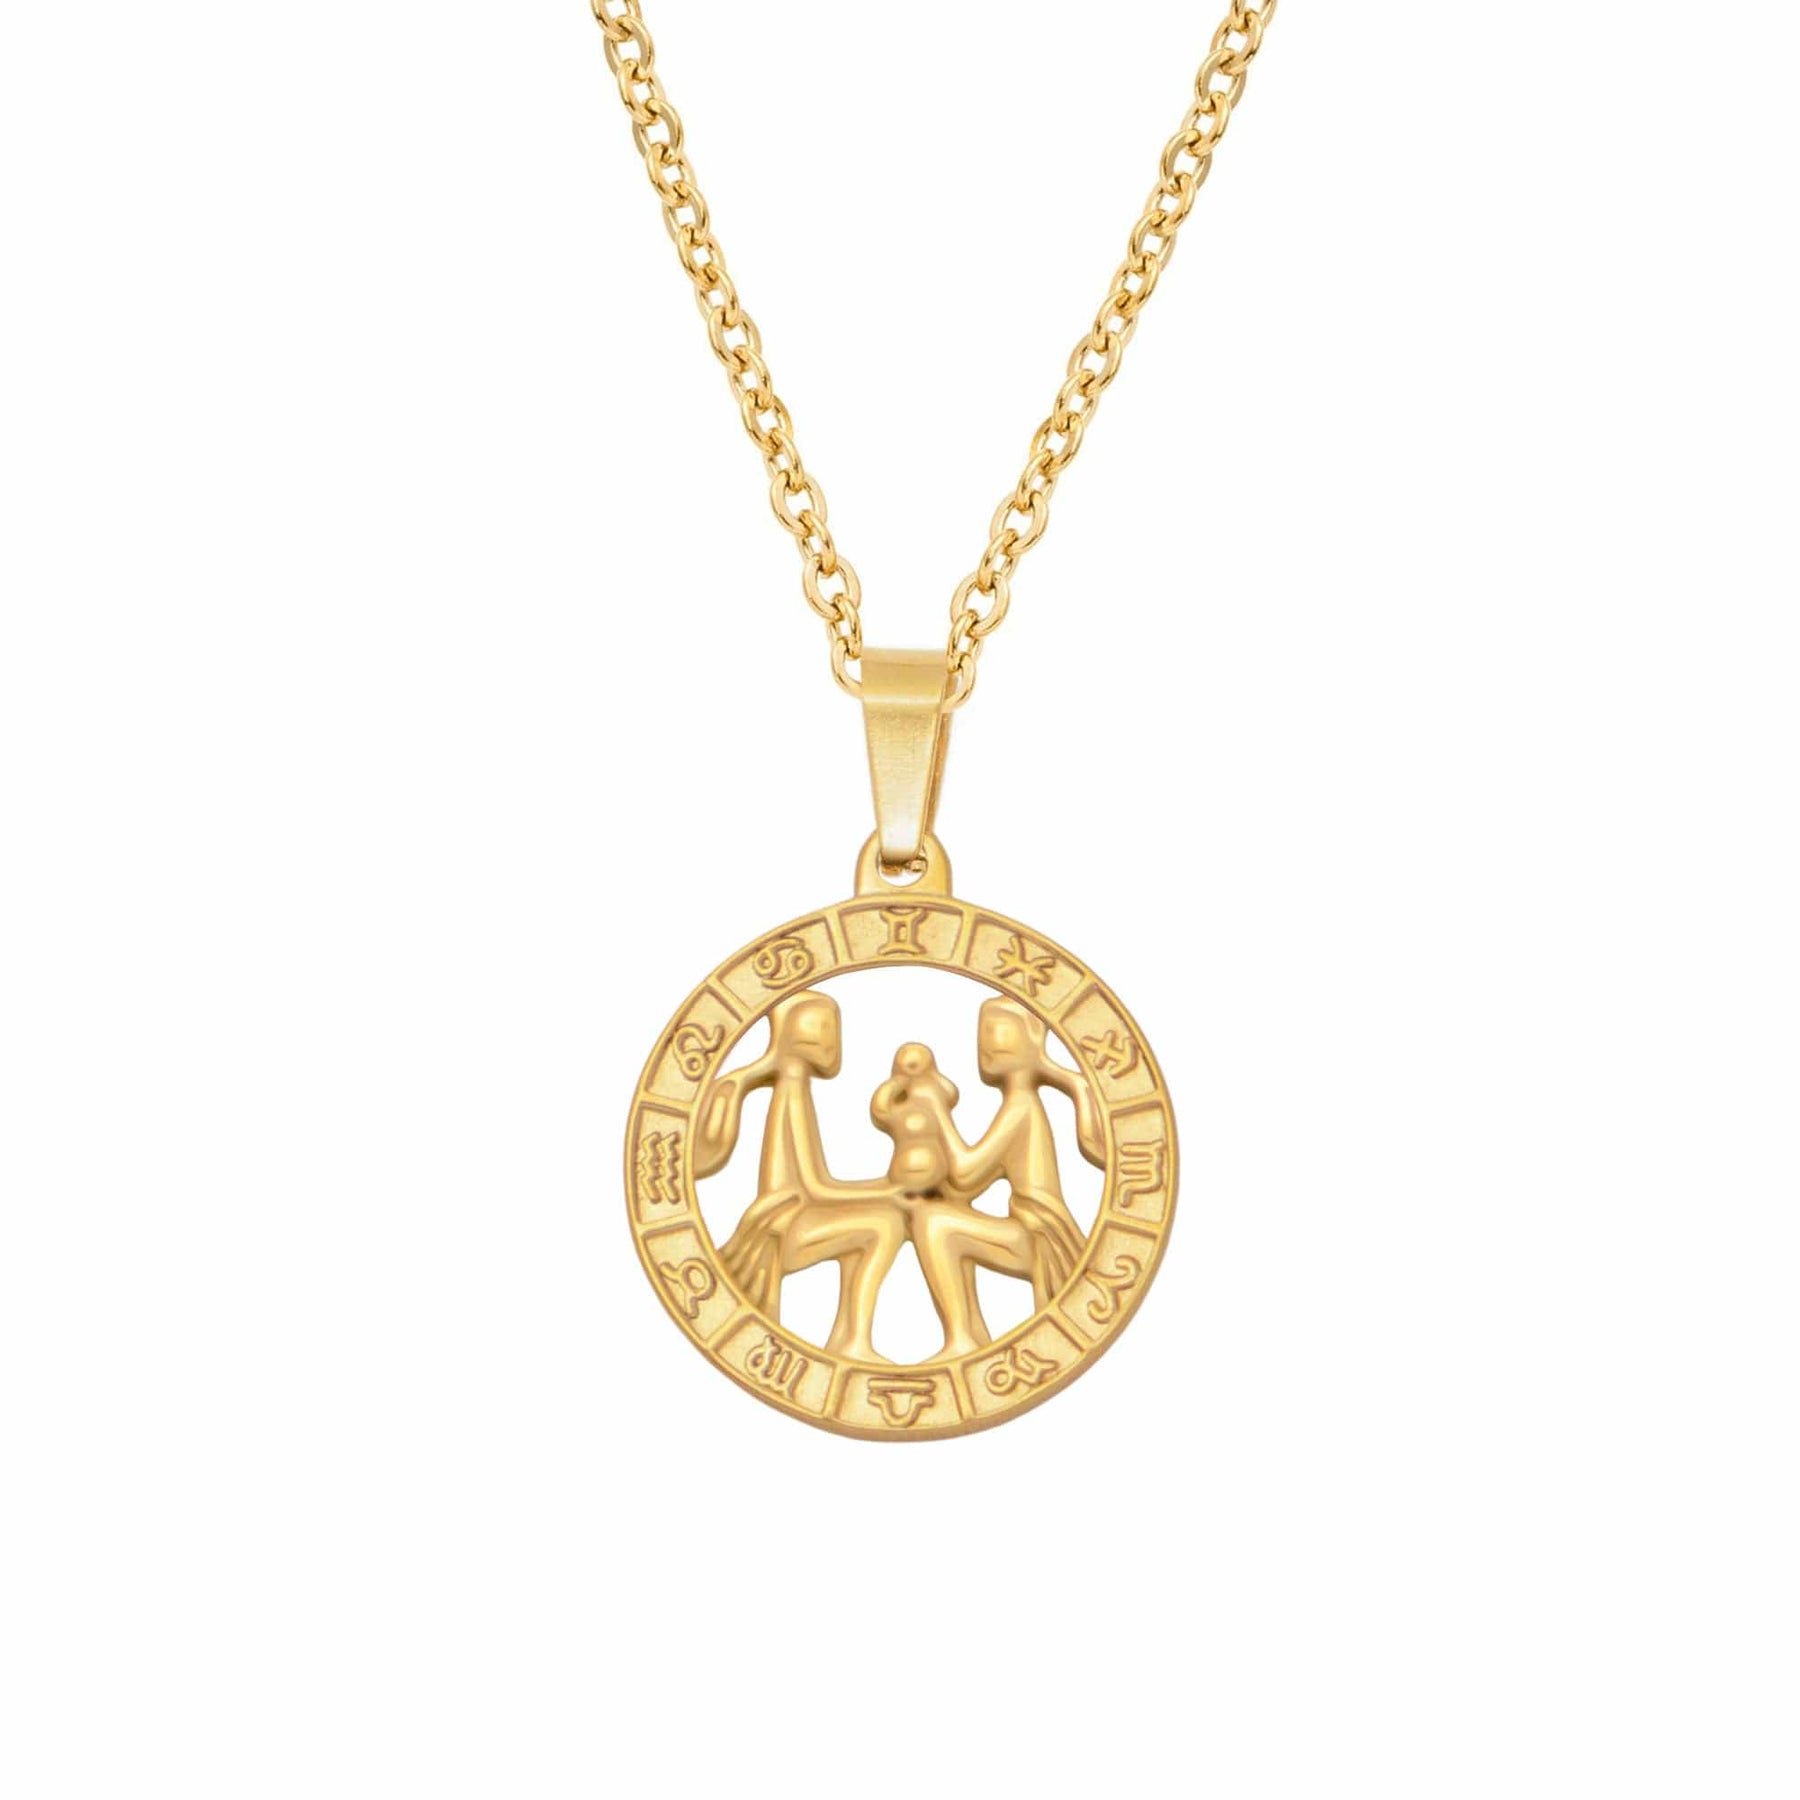 BohoMoon Stainless Steel Classic Zodiac Necklace Gold / Gemini